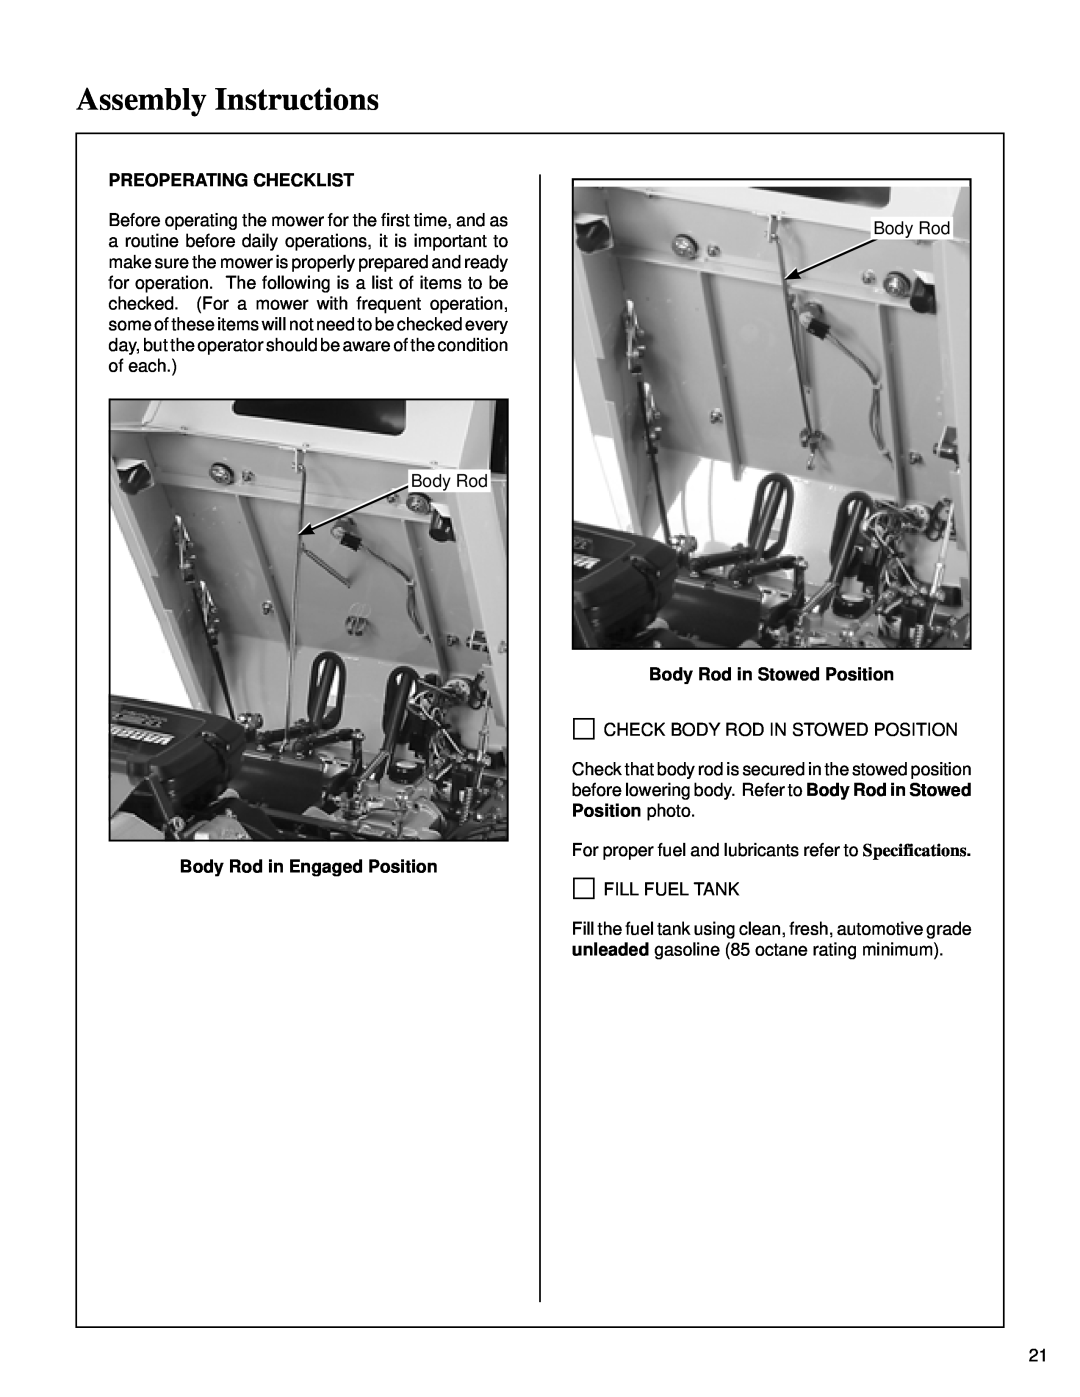 Briggs & Stratton MB (18 HP) owner manual Assembly Instructions, Preoperating Checklist, Body Rod in Engaged Position 